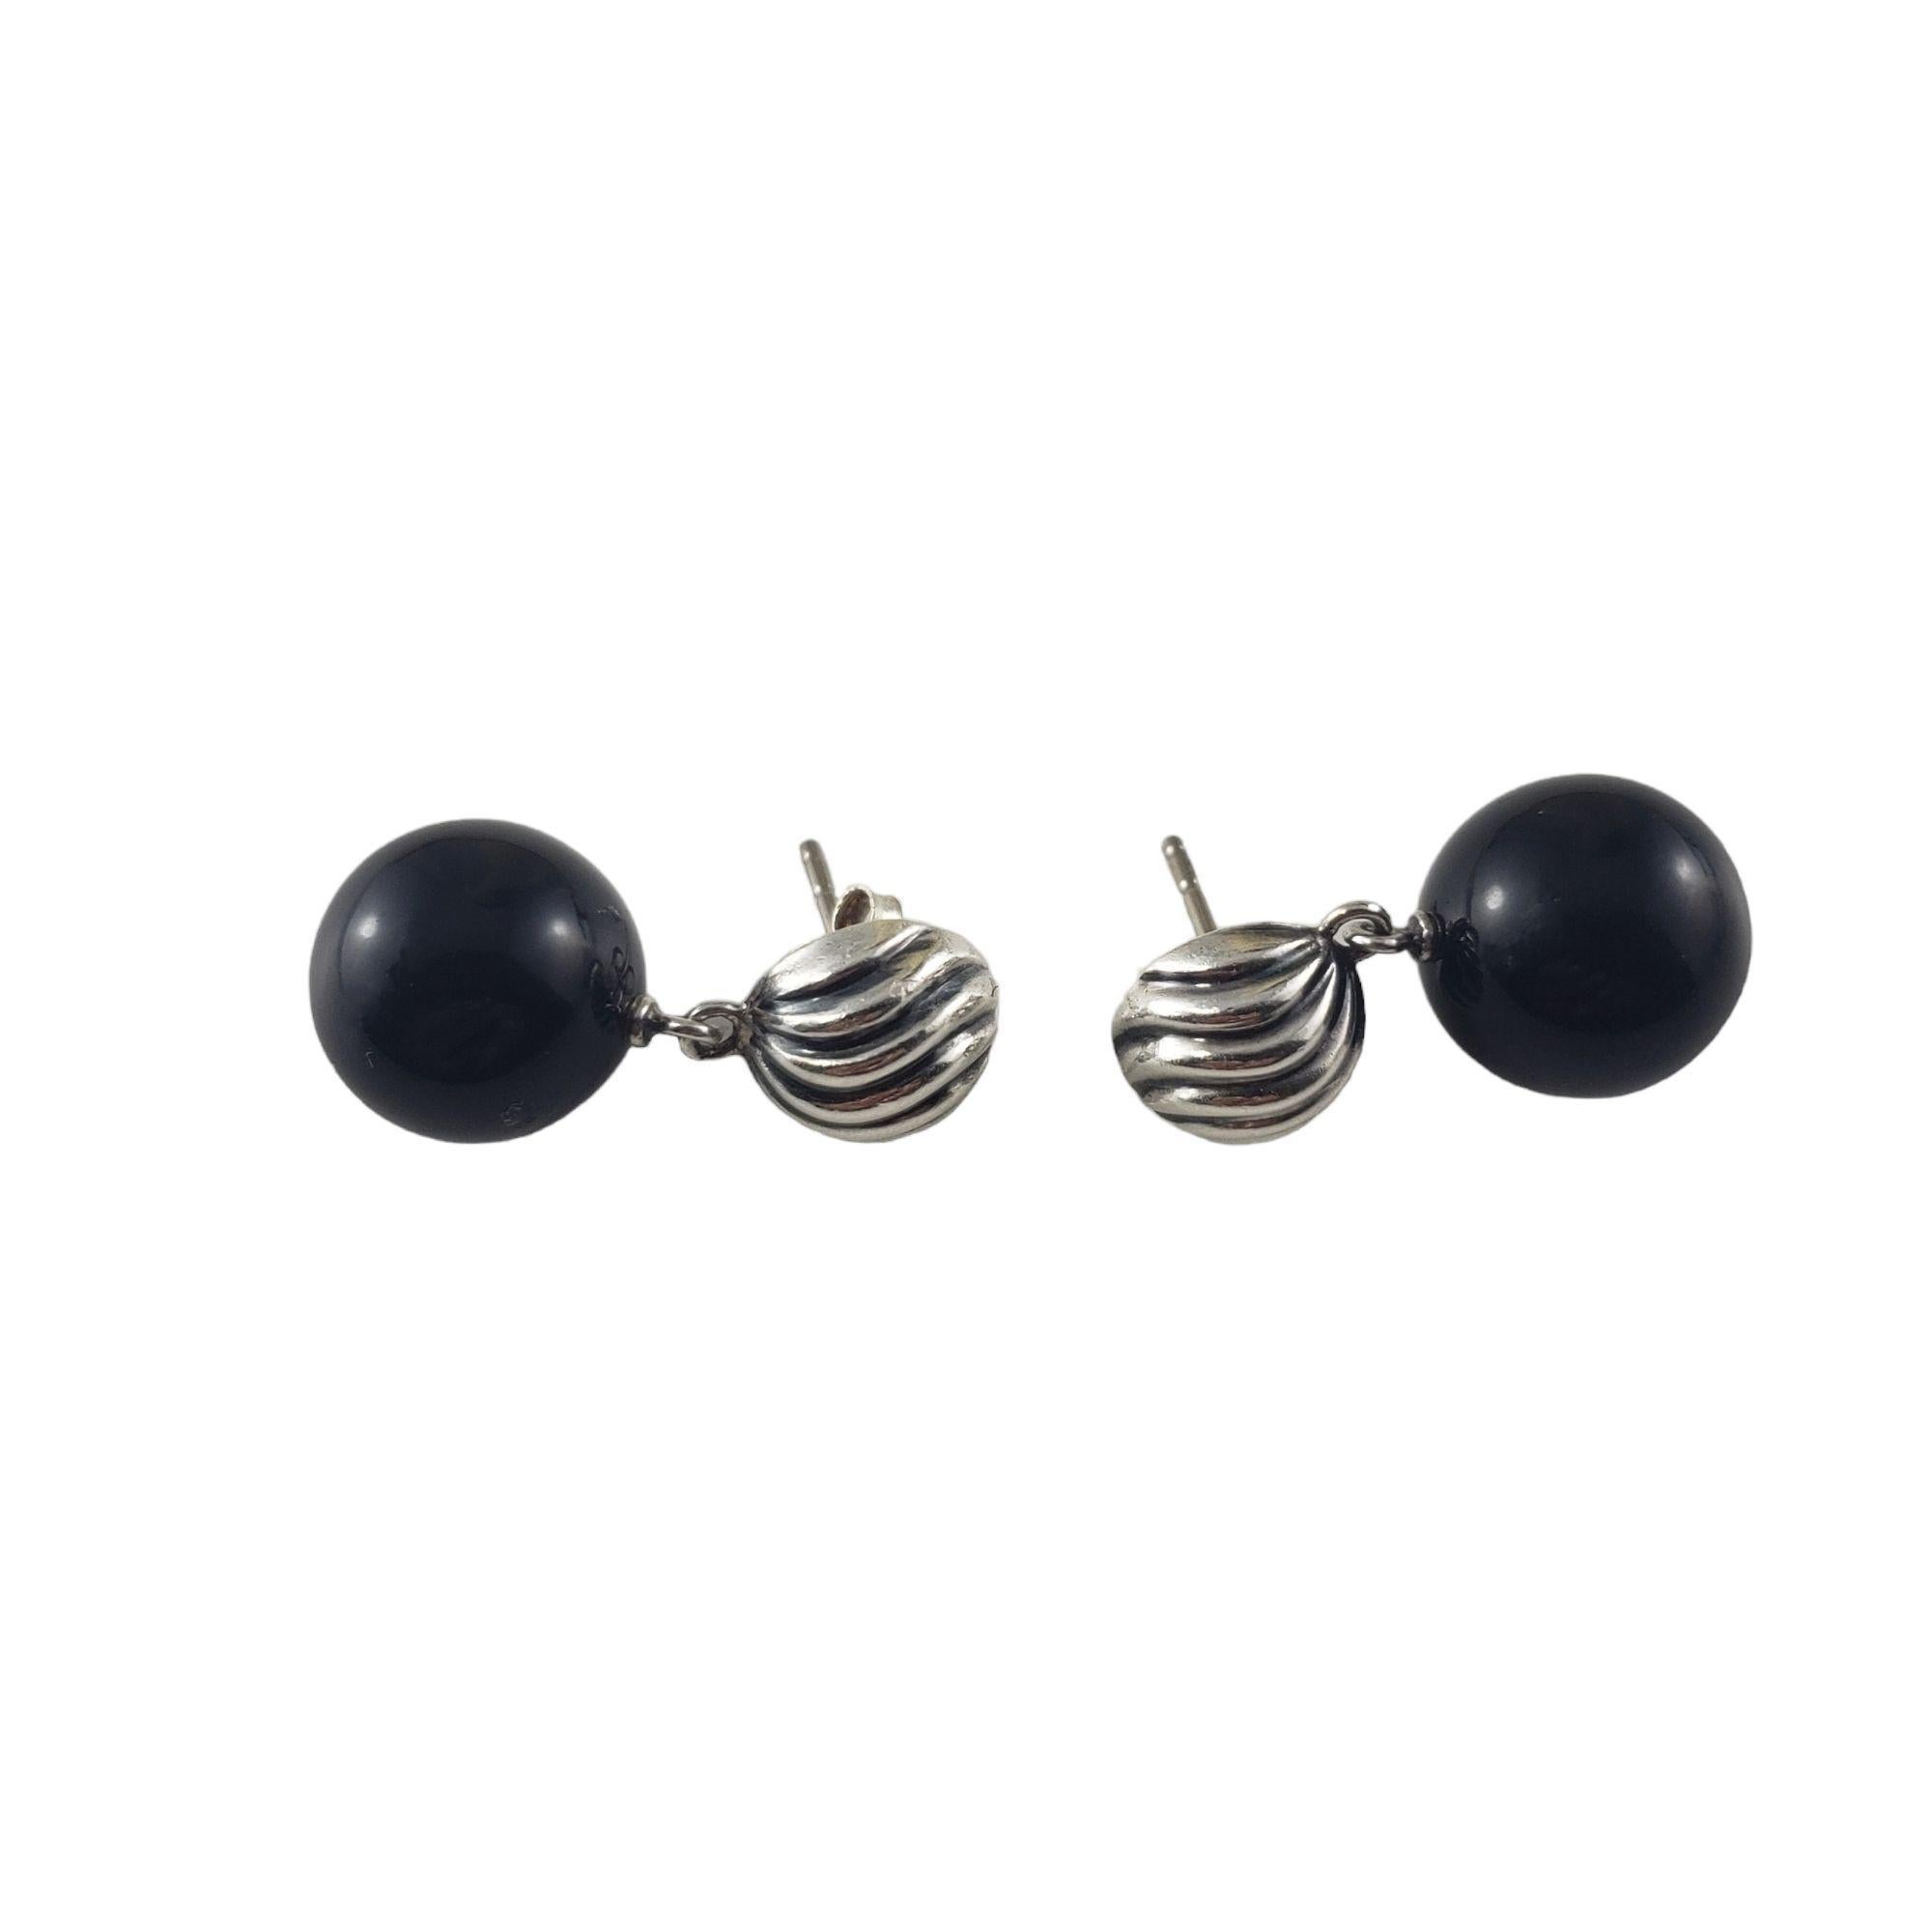 Vintage David Yurman Sterling Silver and Black Onyx Drop Earrings-

These stunning earrings are crafted in beautifully detailed sterling silver and dangling black onyx stones (12 mm) by David Yurman. Push back closures.

Size: 26 mm x 12